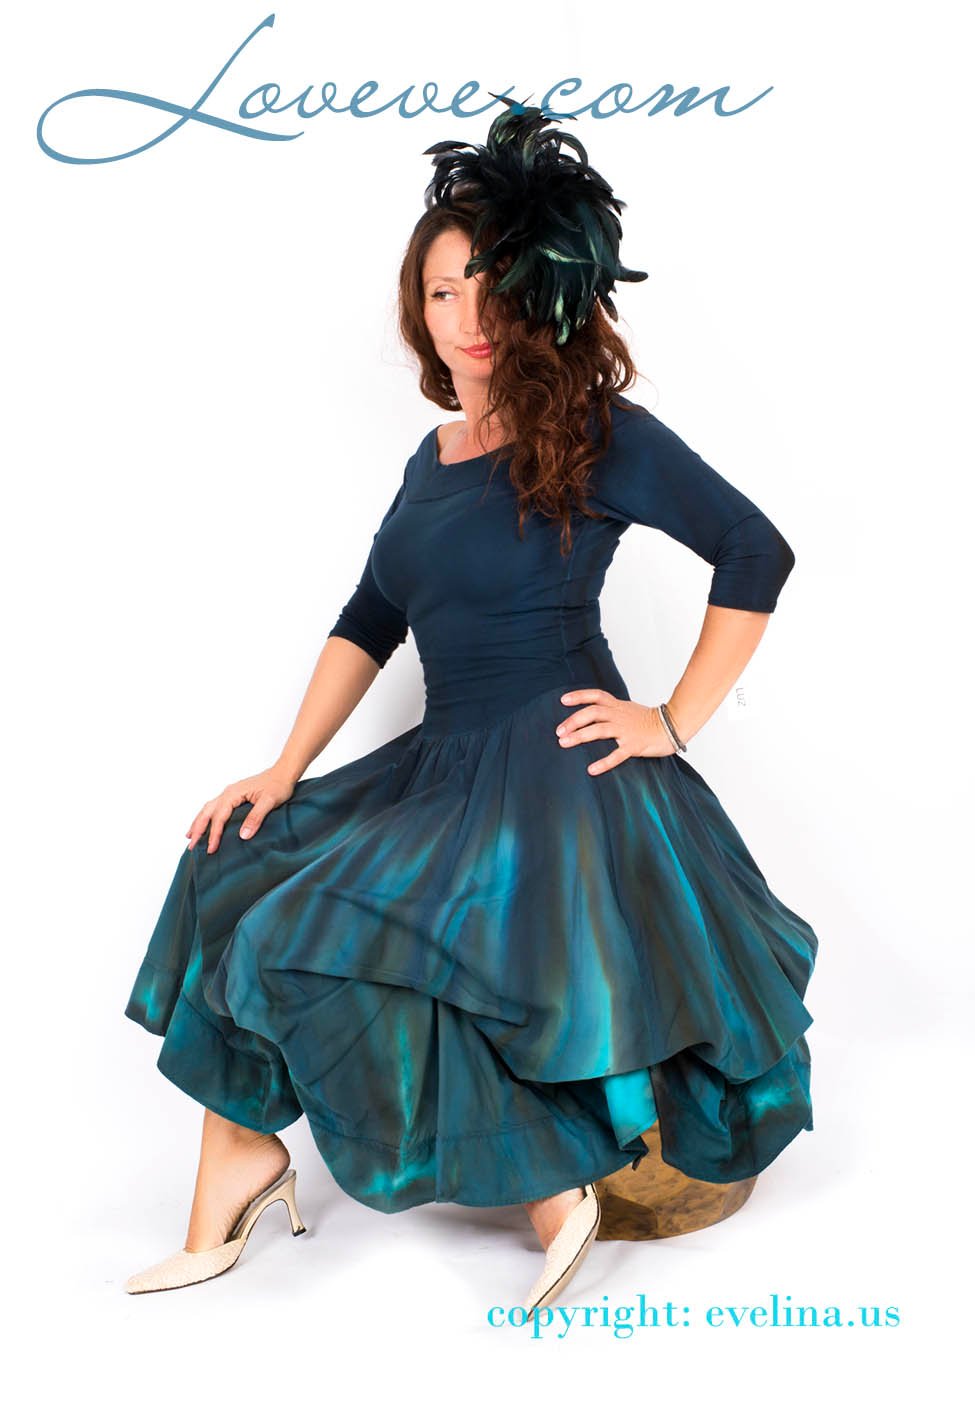 Image of Luna Luz Tie-Dye Boutique Dress with Interior Ties in Green Hues